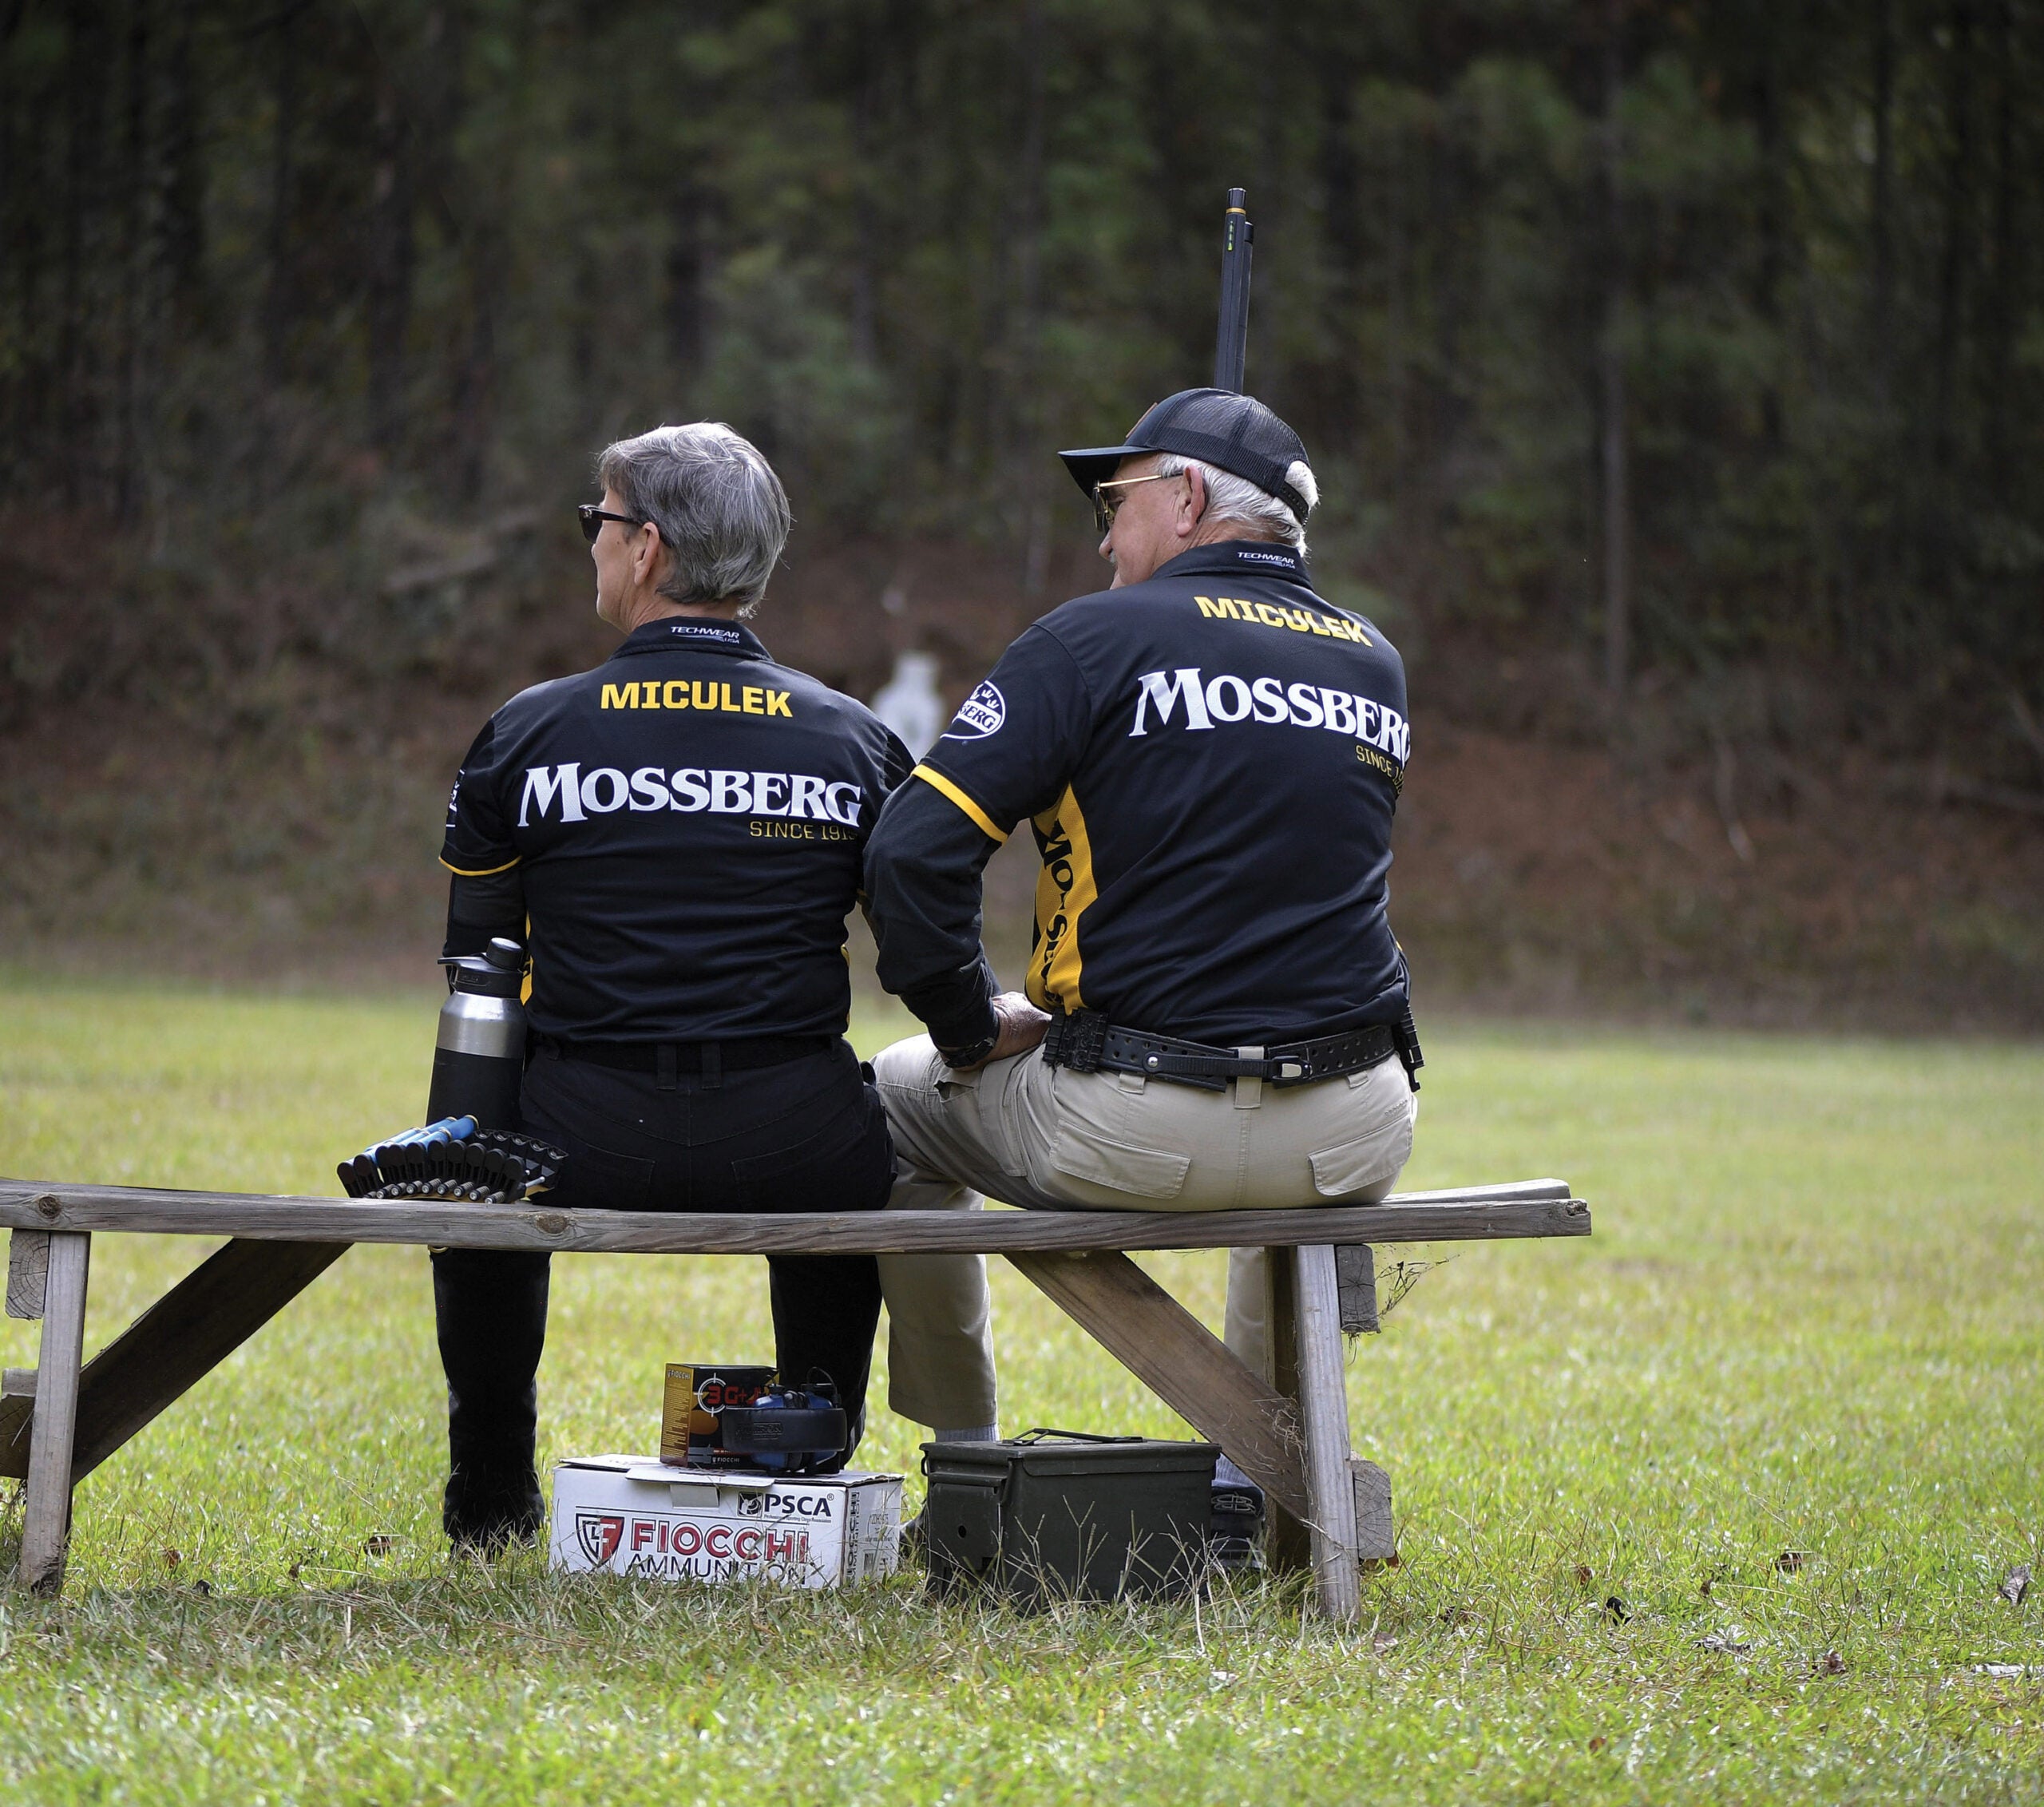 Pro shooters Jerry and Kay Miculek sit on a bench, backs to the camera, at a shooting range.